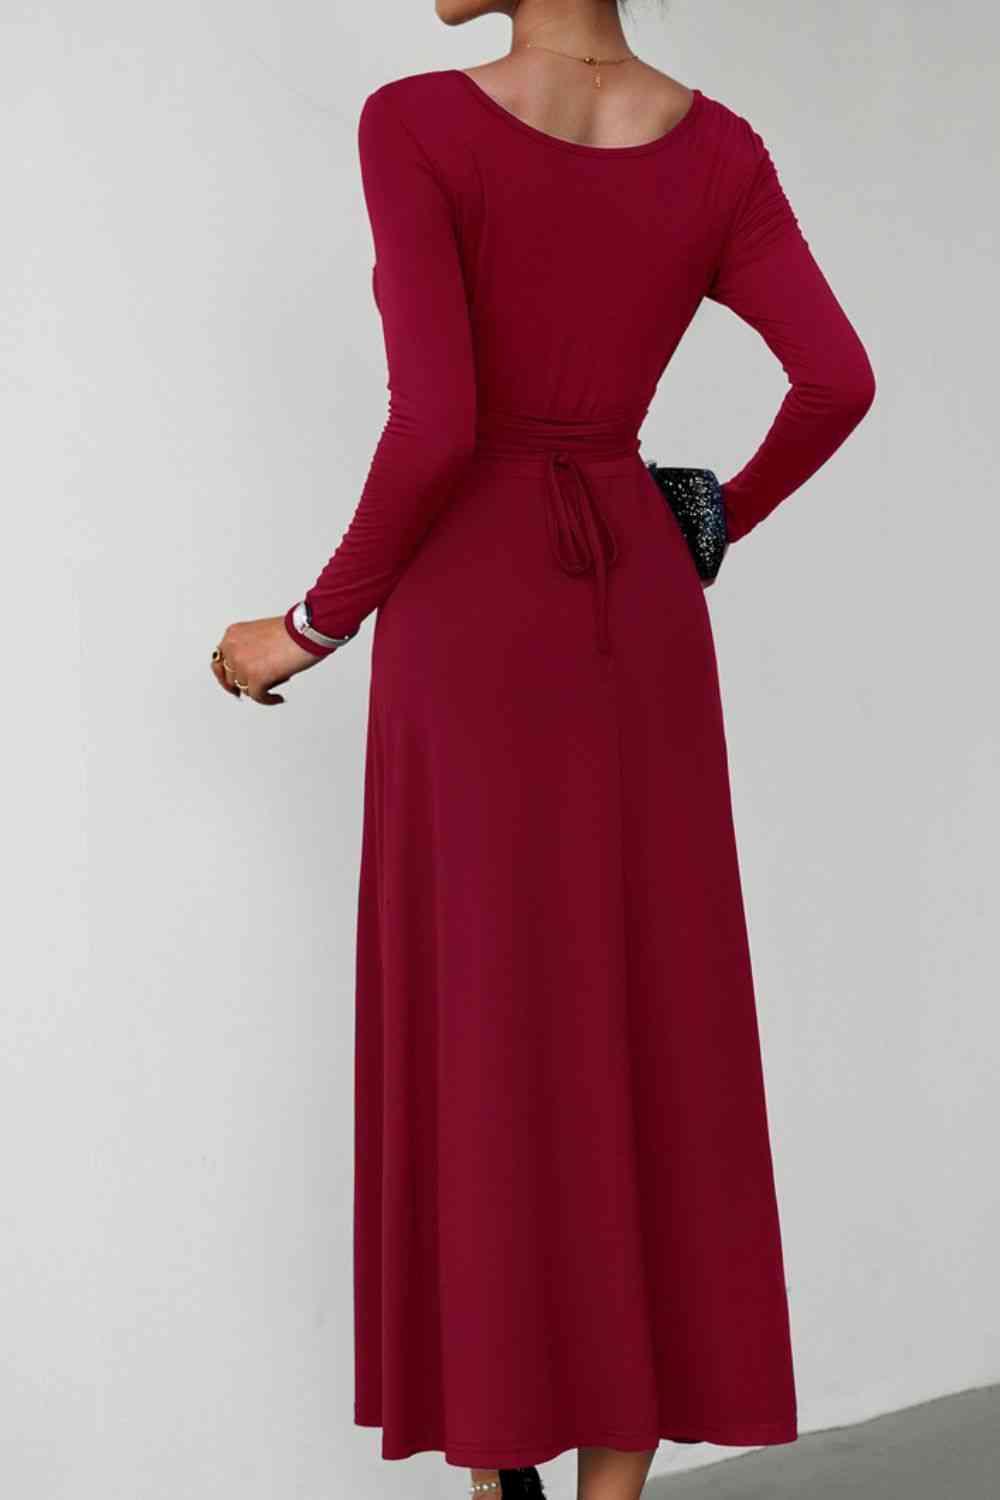 a woman in a red dress with her hands on her hips